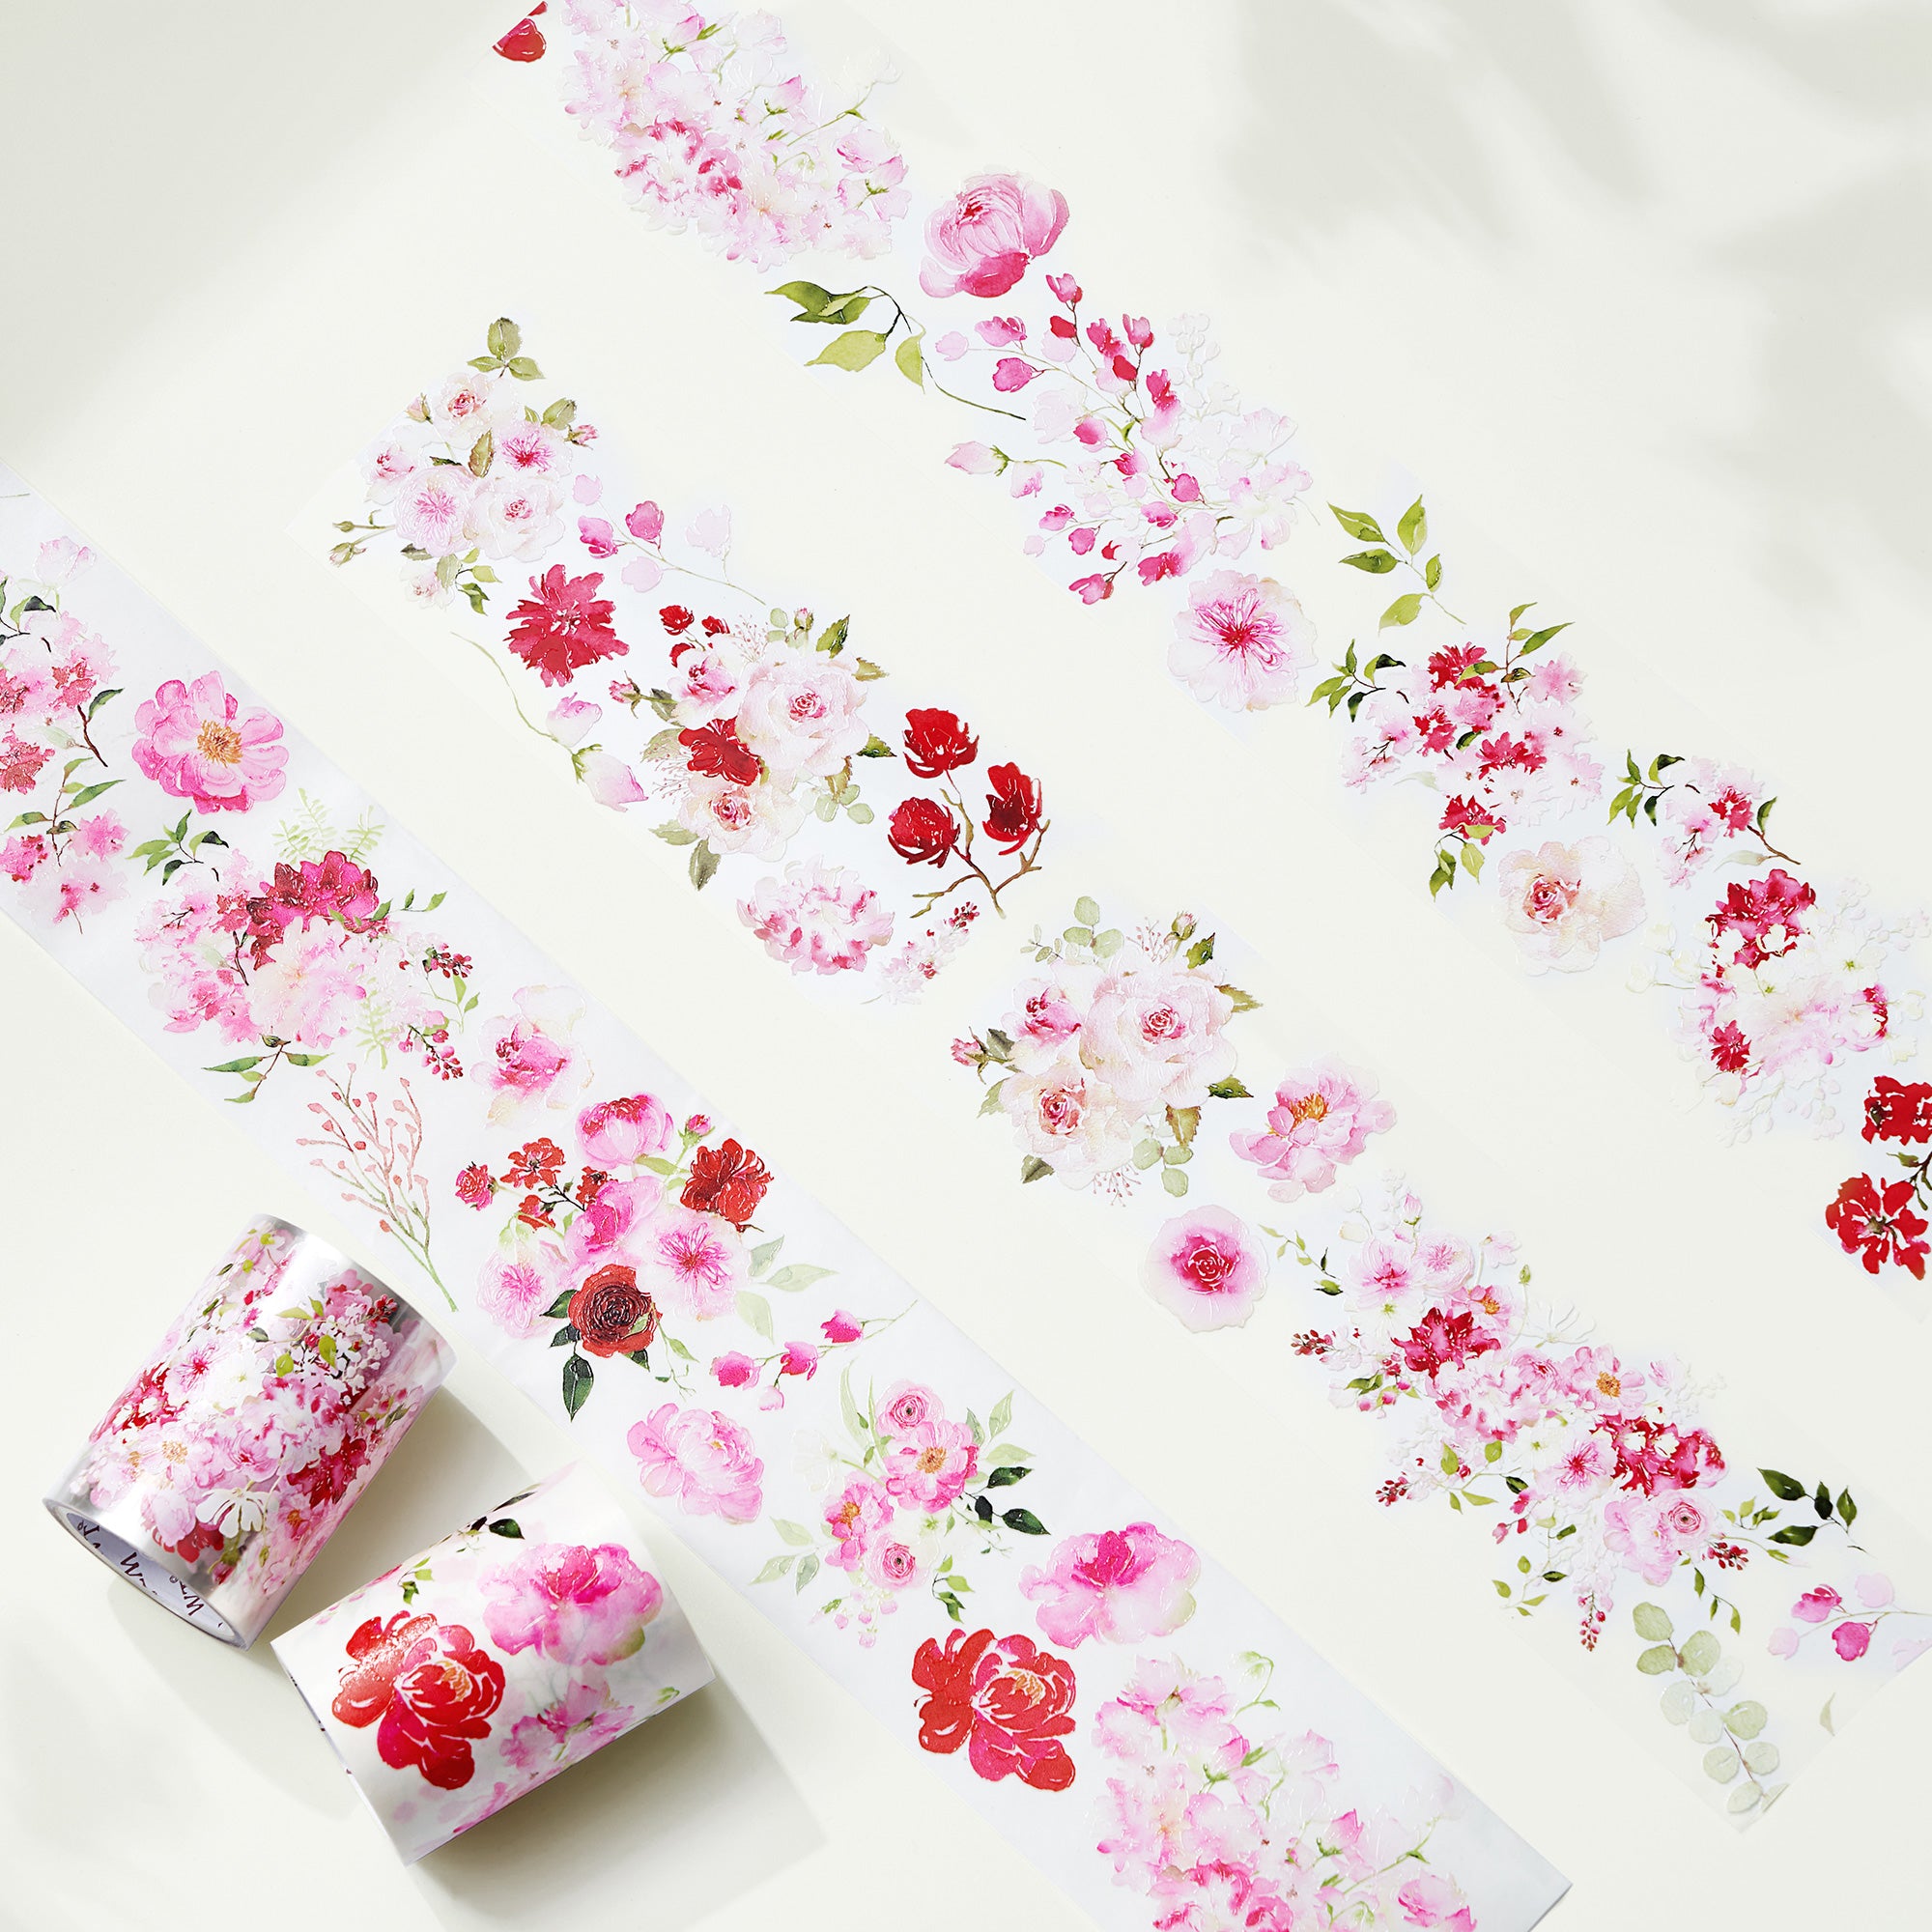 FAVOMOTO 6 Rolls Floral Tape Flower Wrapping Paper Bouquet Flower Tape for  Bouquets Florist Tape Floral washi Tape Floral Fresh Flowers Florist Craft